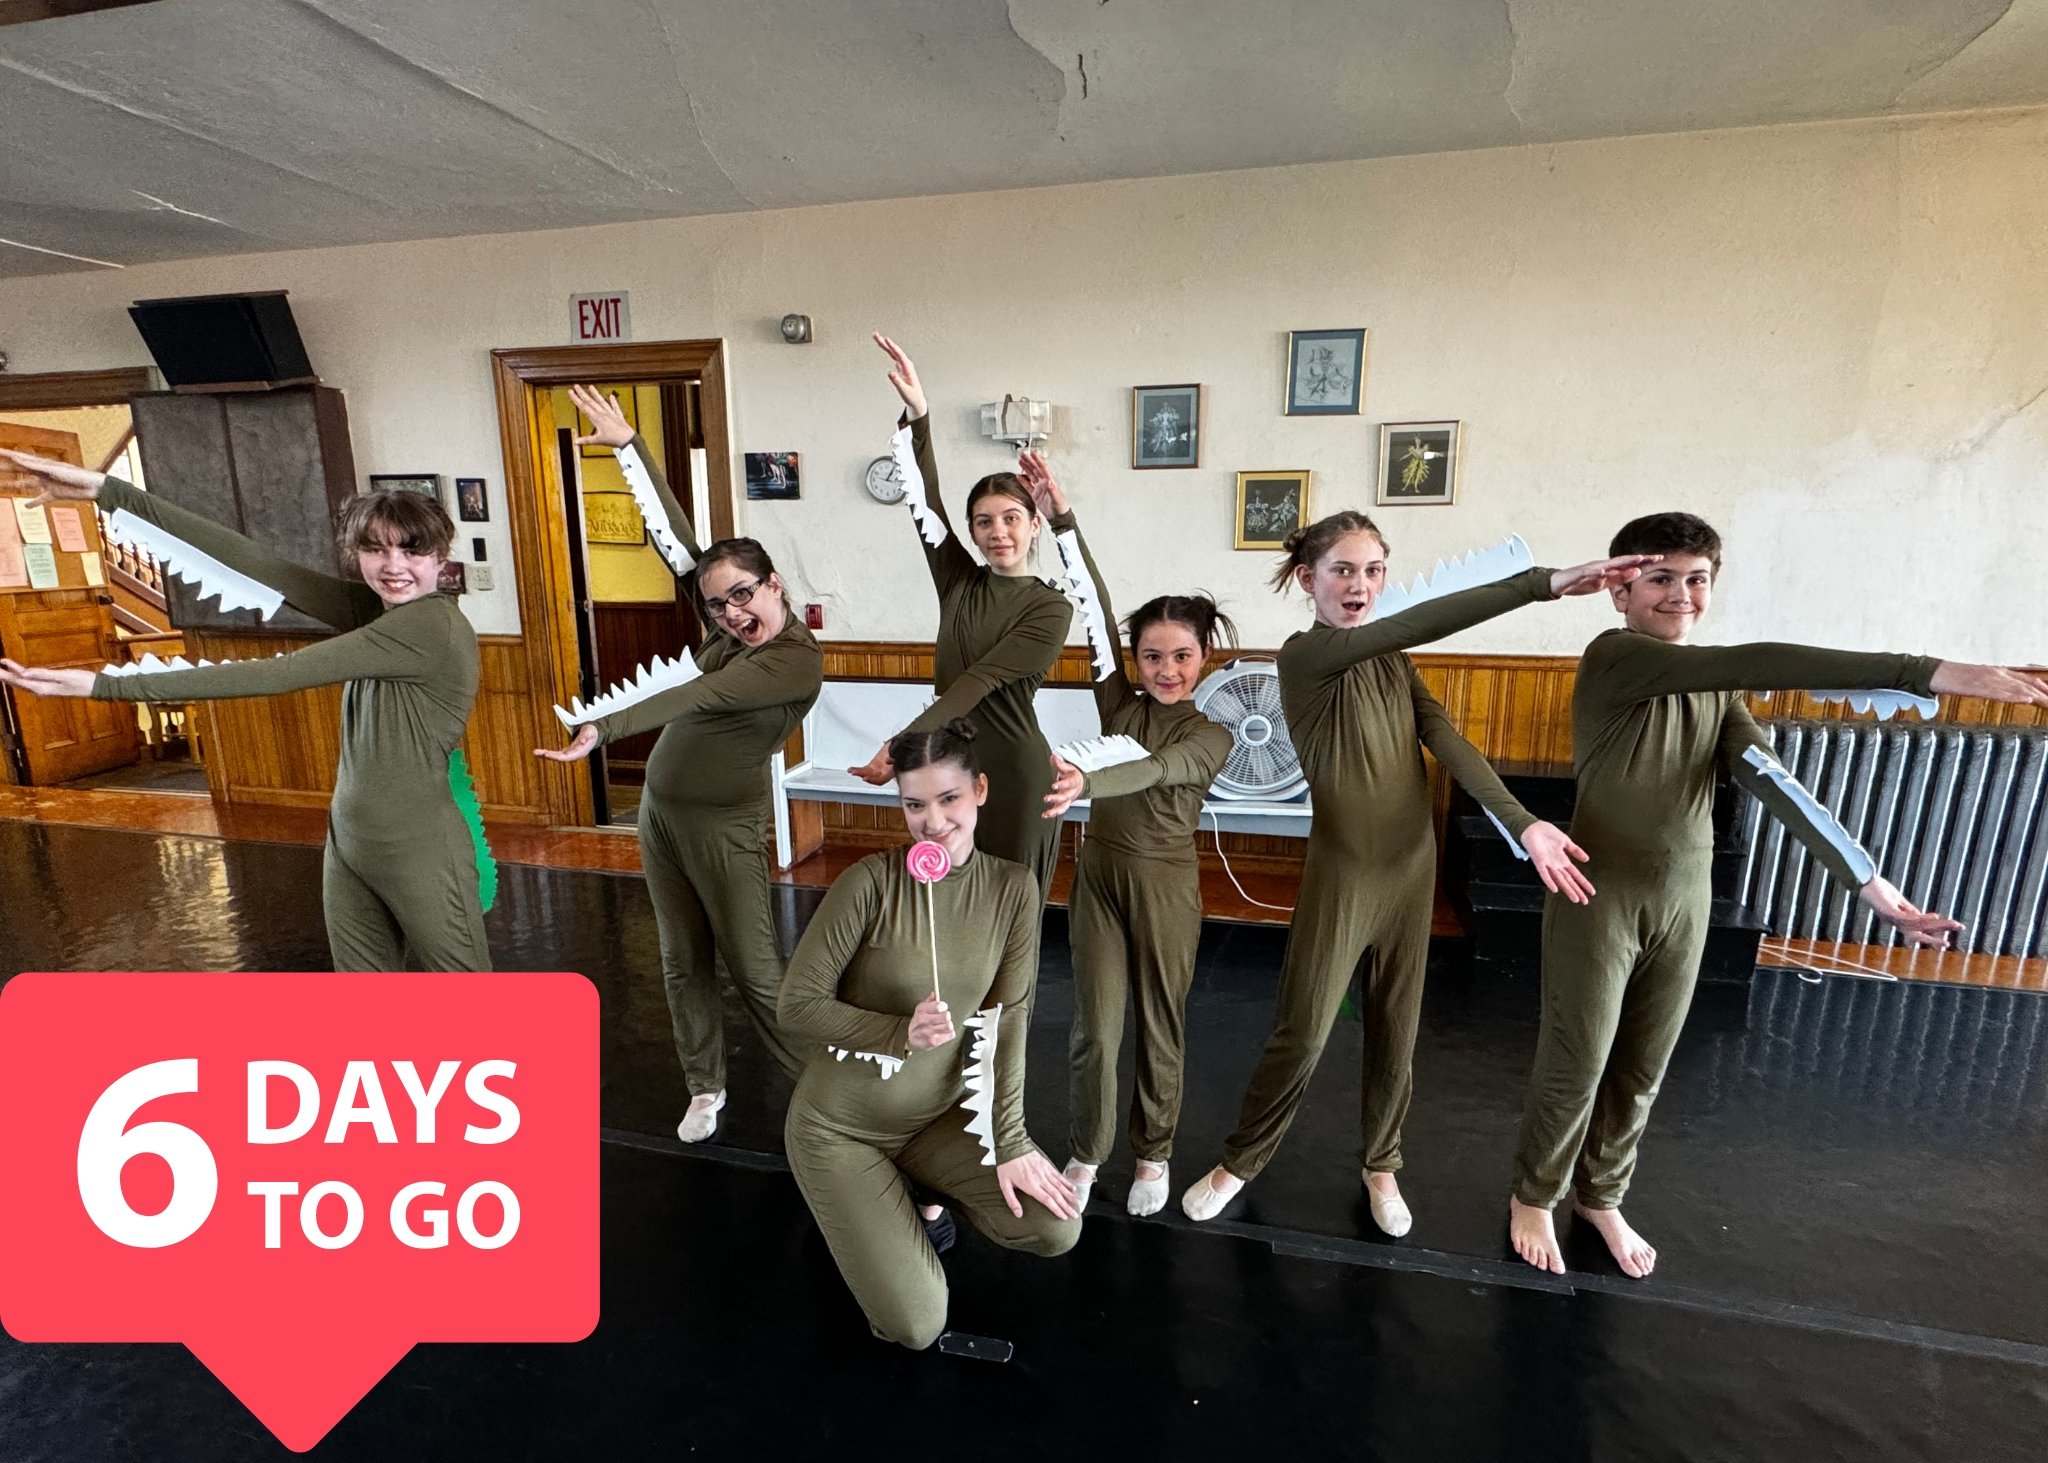 Tickets are on sale for 'Robinson Ballet Presents: My Father's Dragon' coming to The Gracie Theatre May 4th and May 5th at 3pm! This is a show for all ages. 
Purchase your tickets:
www.robinsonballet.org/my-fathers-dragon